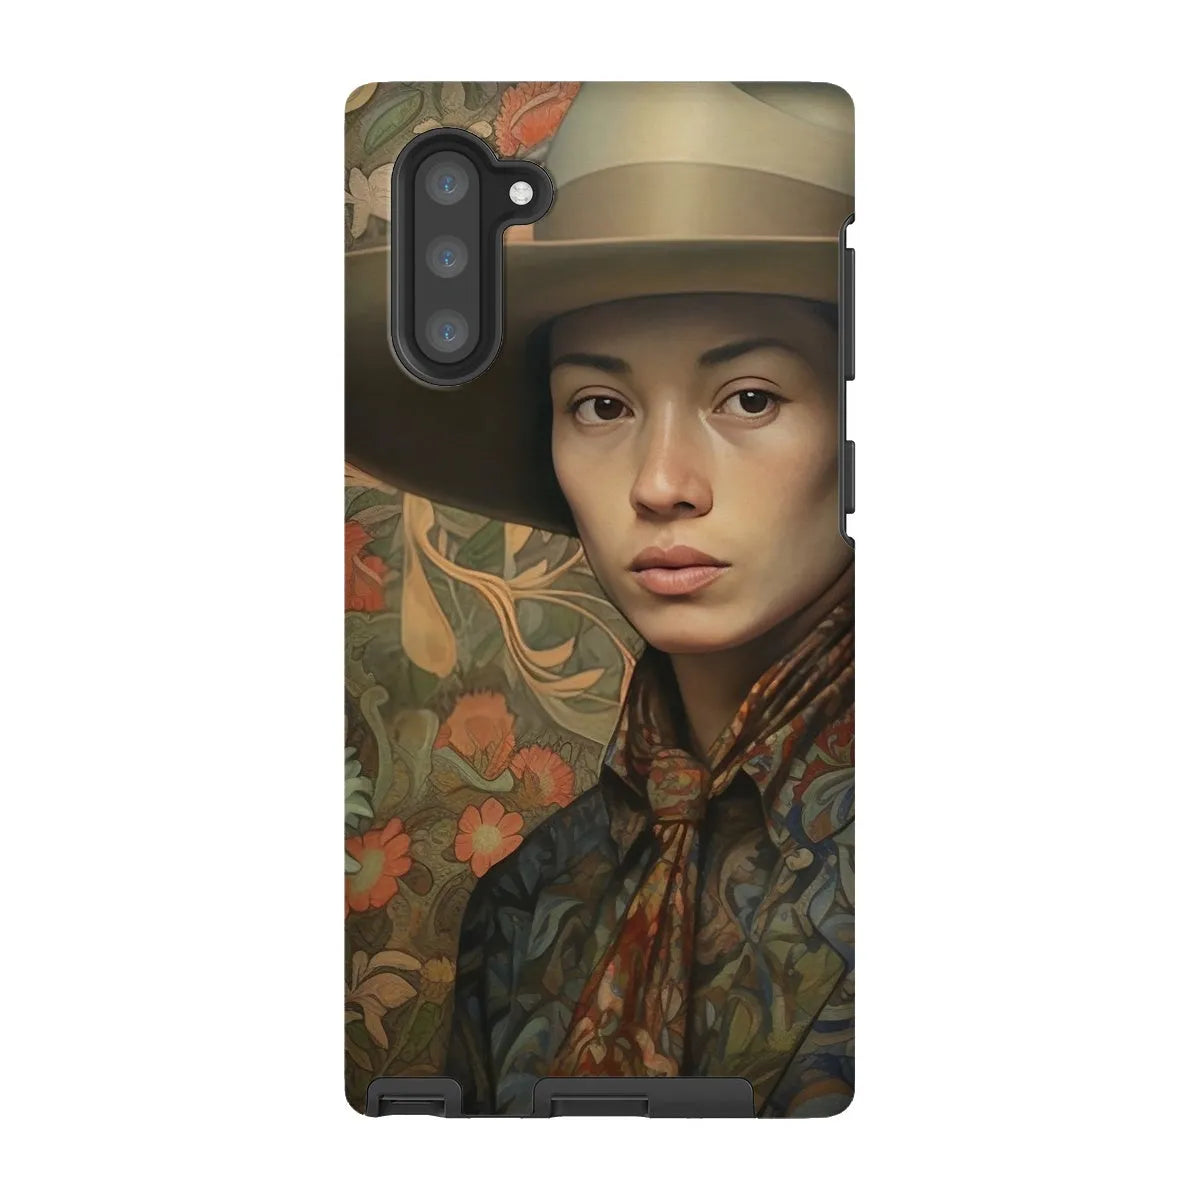 Fulin The Gay Cowboy - Dandy Gay Men Art Phone Case - Samsung Galaxy Note 10 / Matte - Mobile Phone Cases - Aesthetic